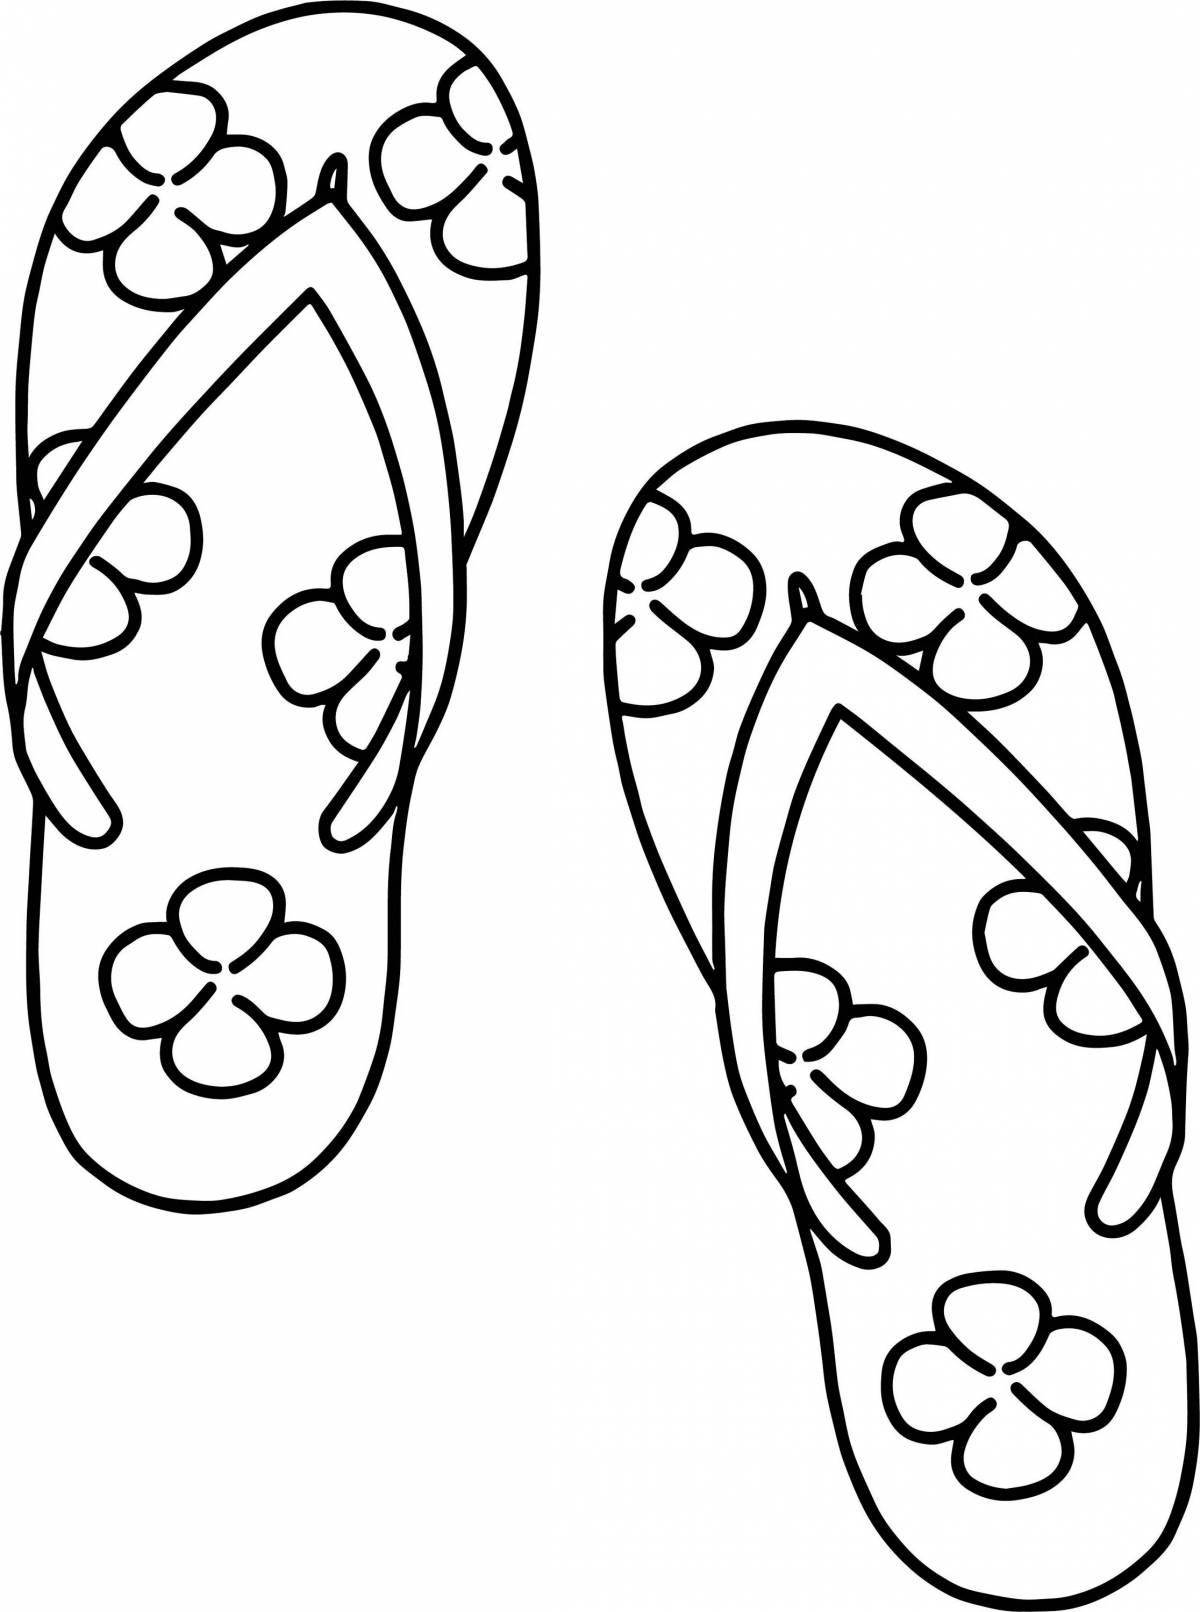 Gorgeous slippers coloring page